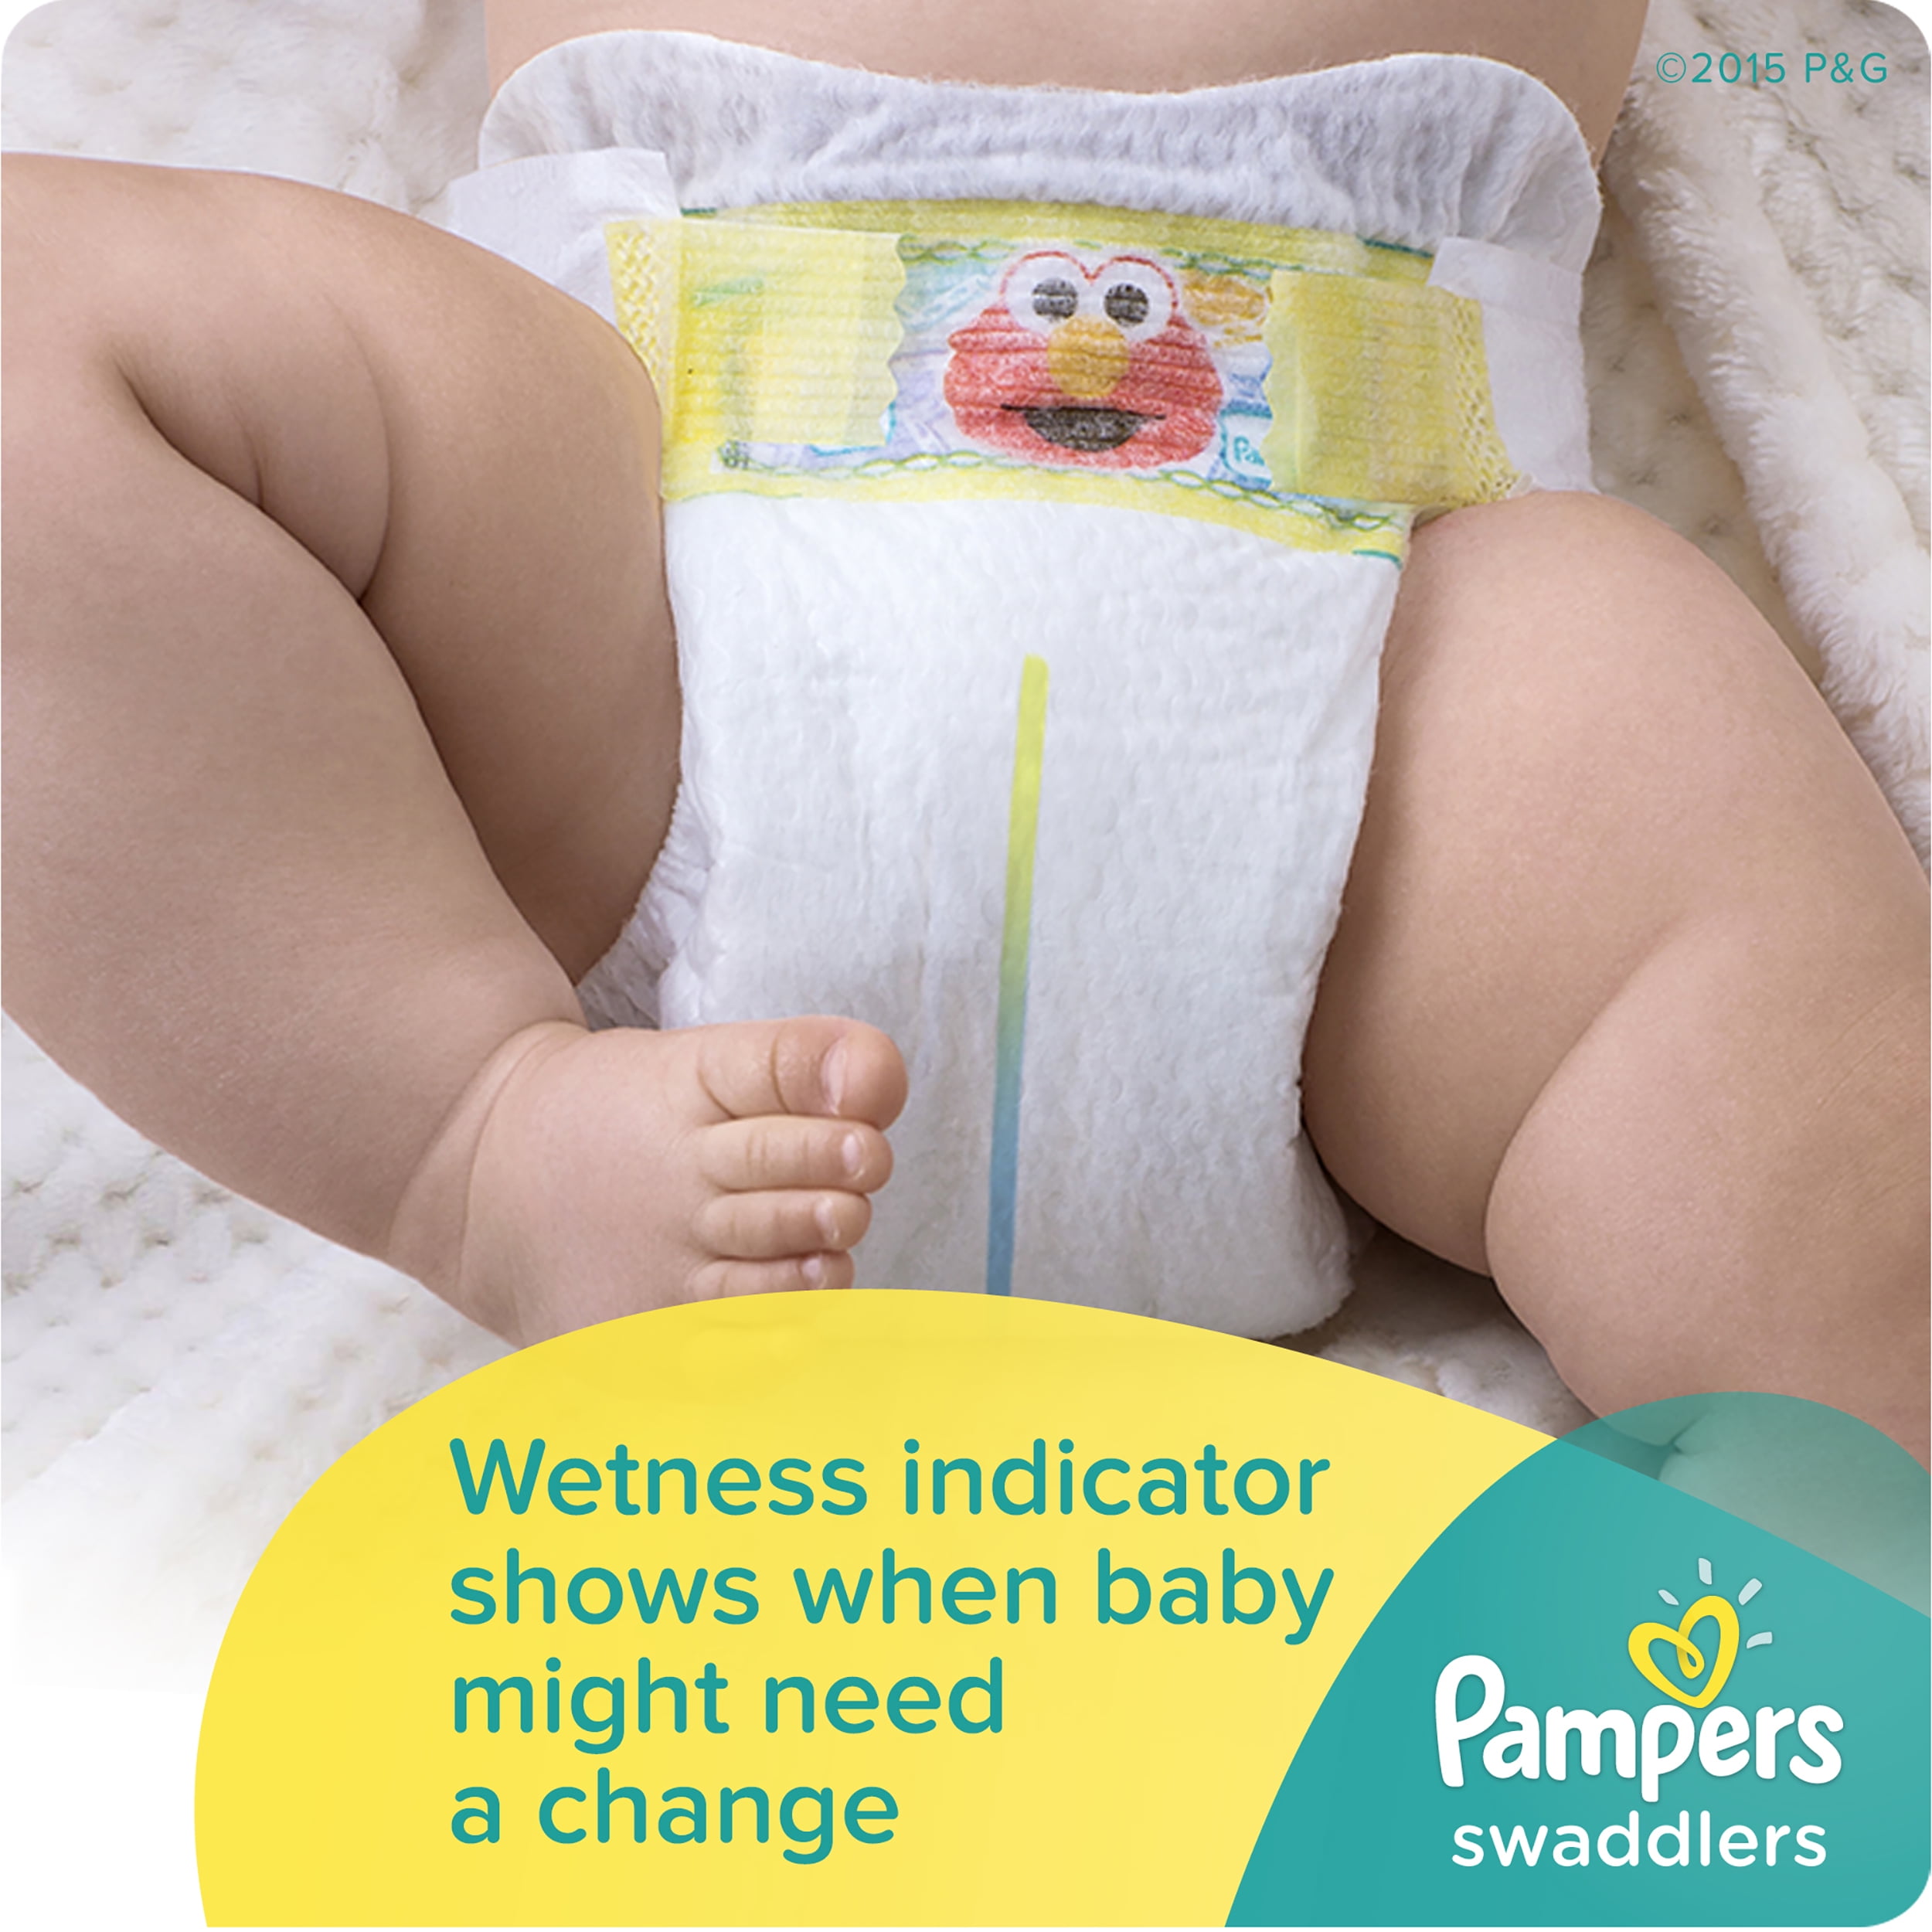 Pampers Swaddlers - Pañales desechables muy suaves para bebé talla 3, 136  unidades